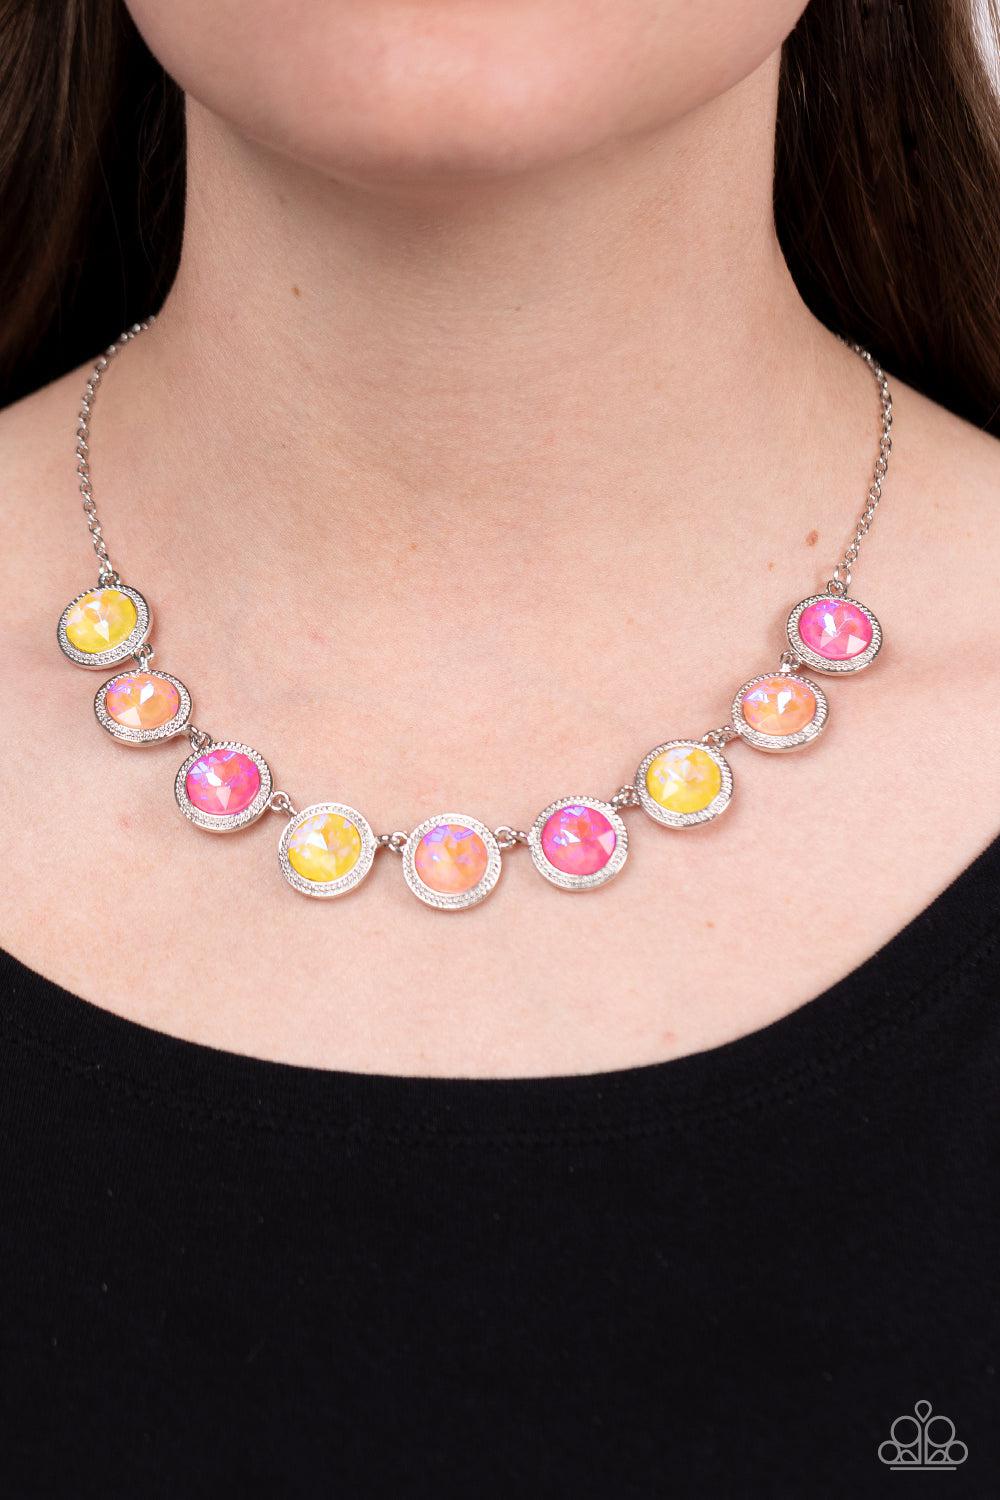 Queen of the Cosmos Iridescent Yellow, Pink &amp; Coral Gem Necklace - Paparazzi Accessories-on model - CarasShop.com - $5 Jewelry by Cara Jewels